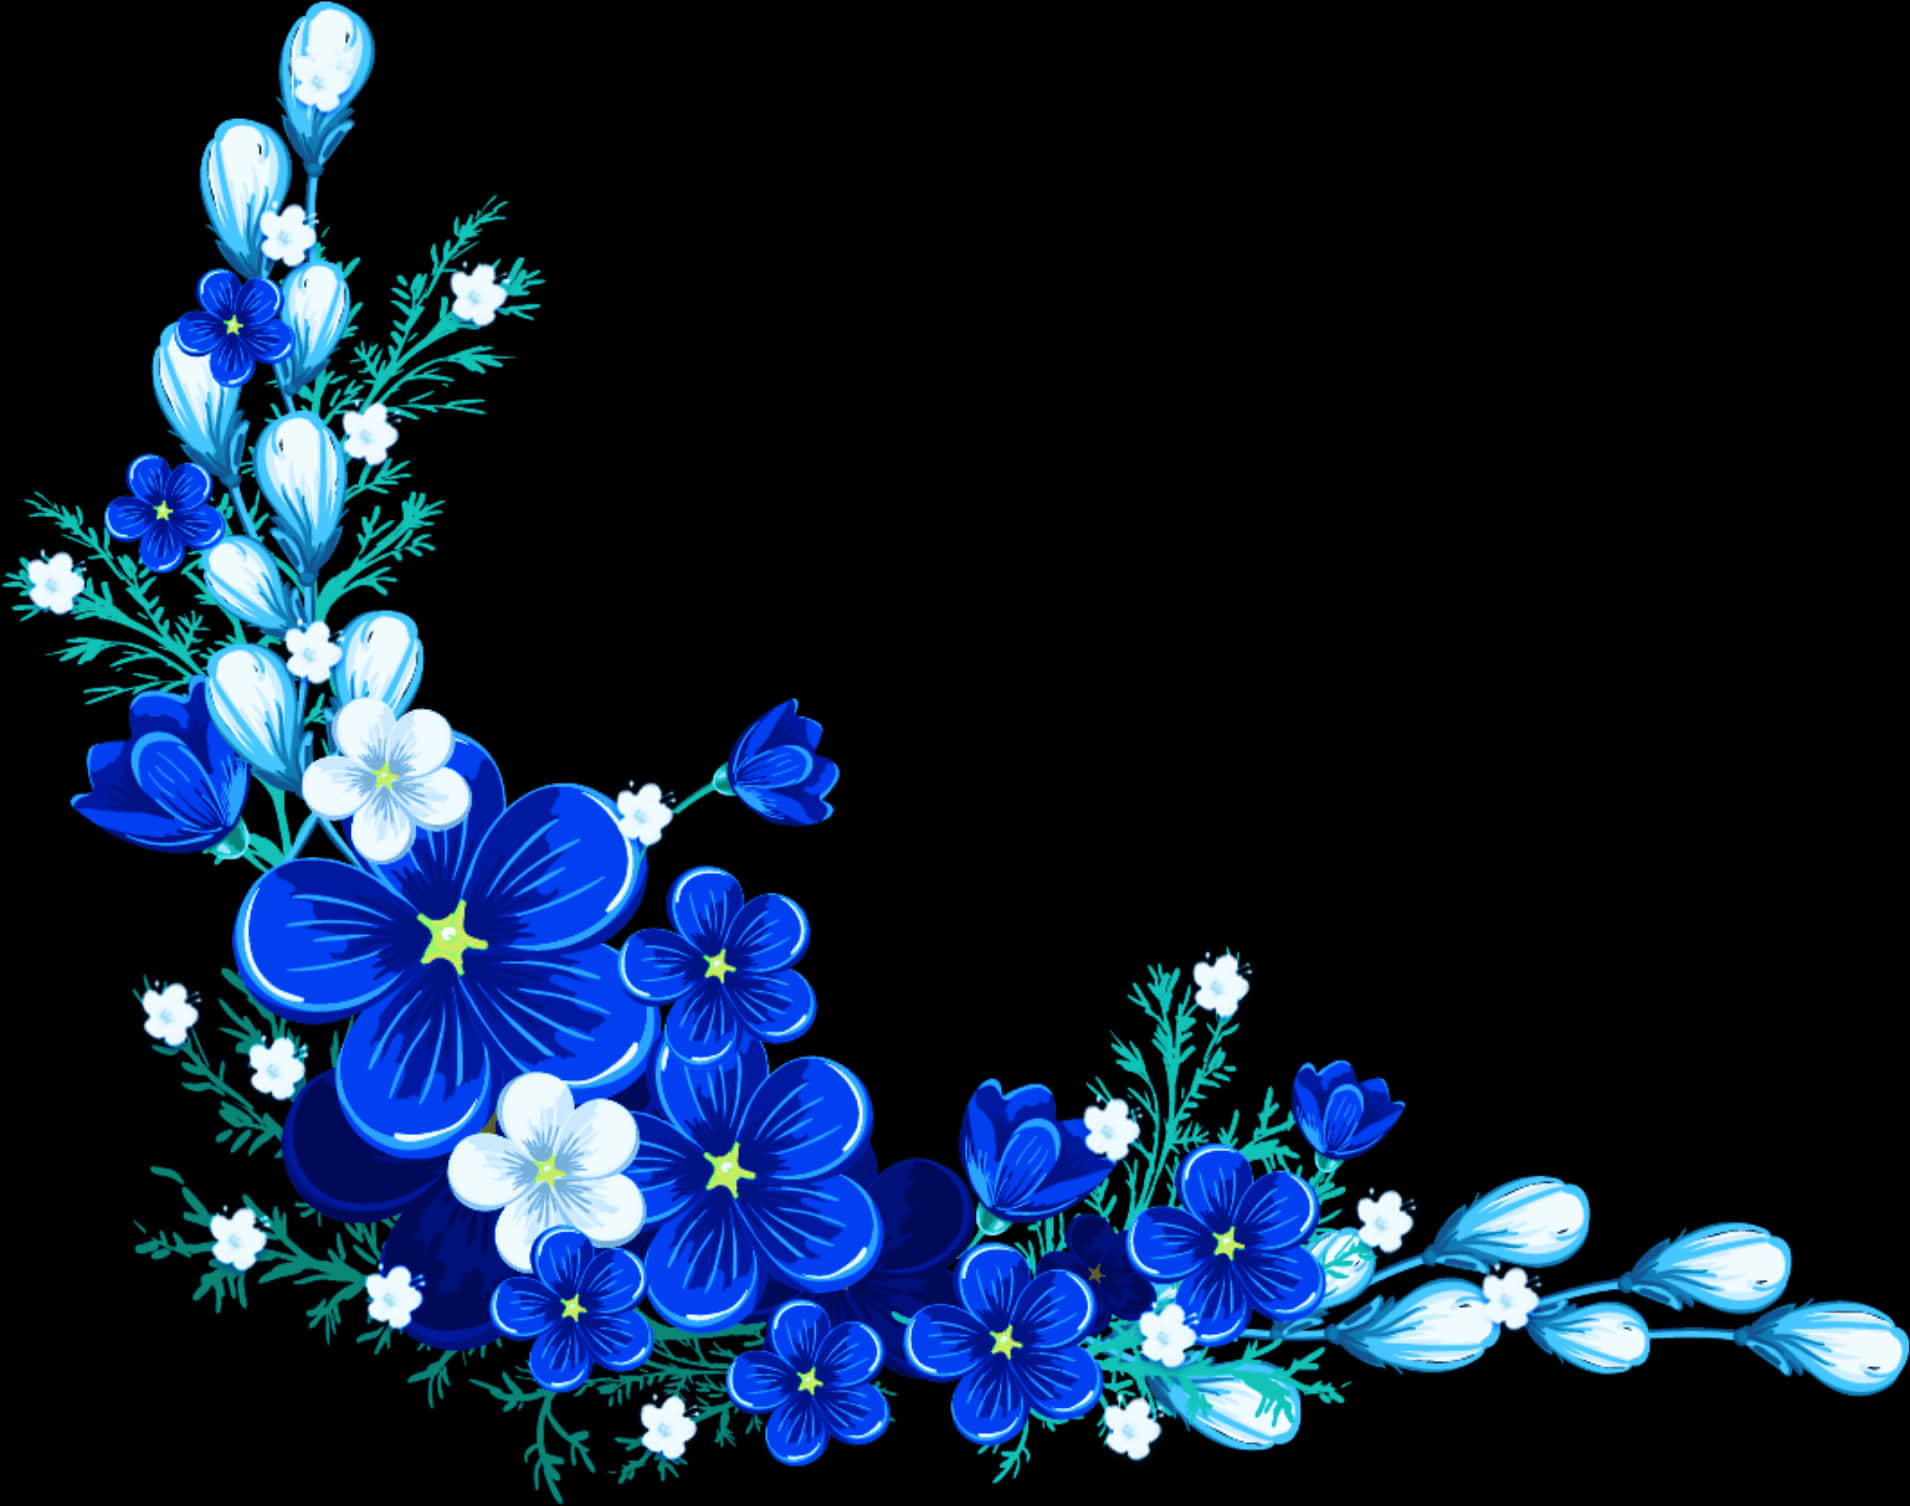 A Blue And White Flowers On A Black Background